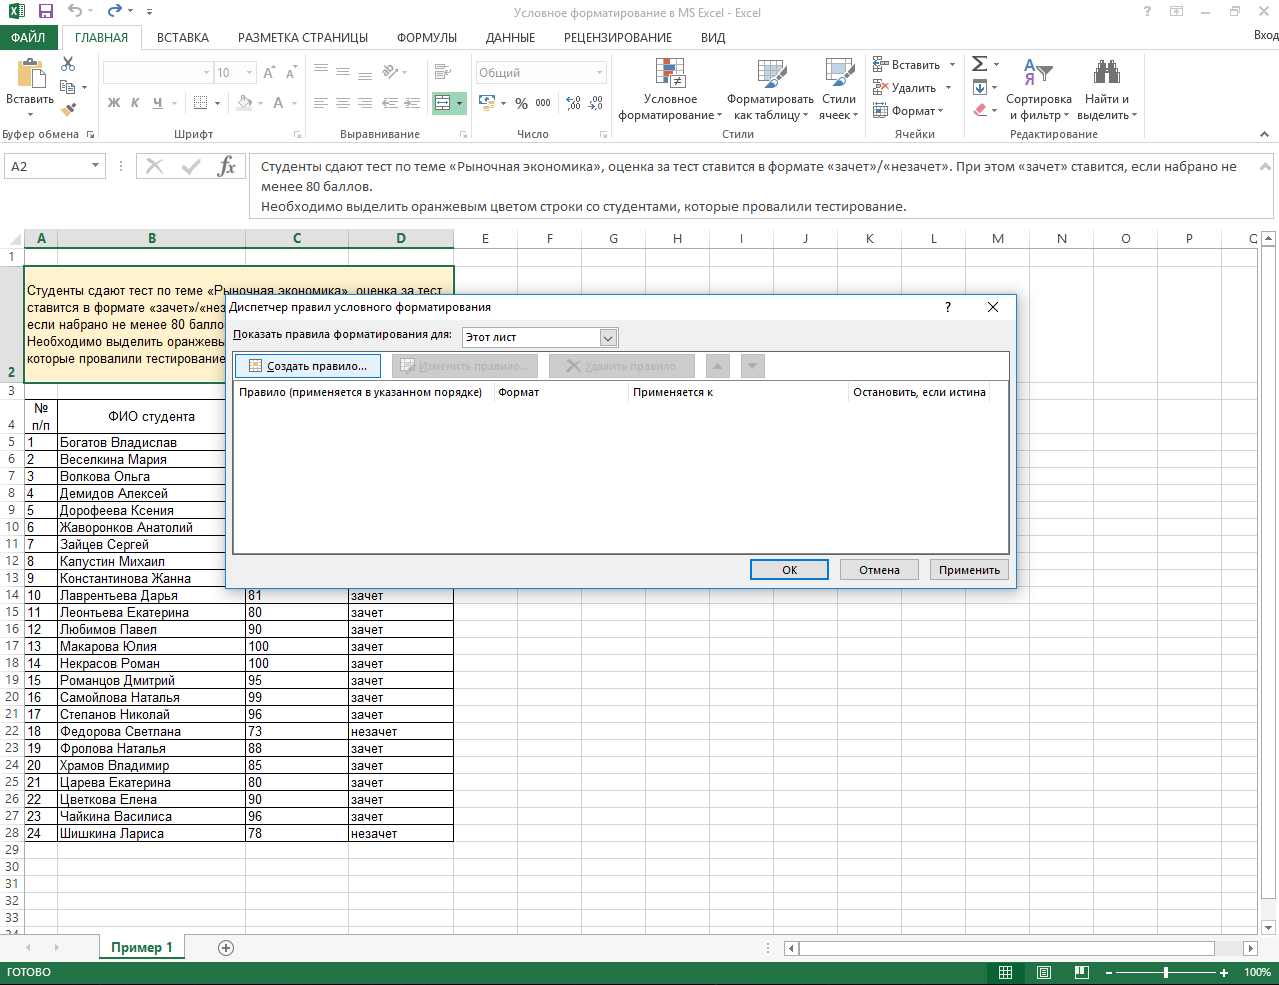 Conditional formatting in Excel - in detail with examples